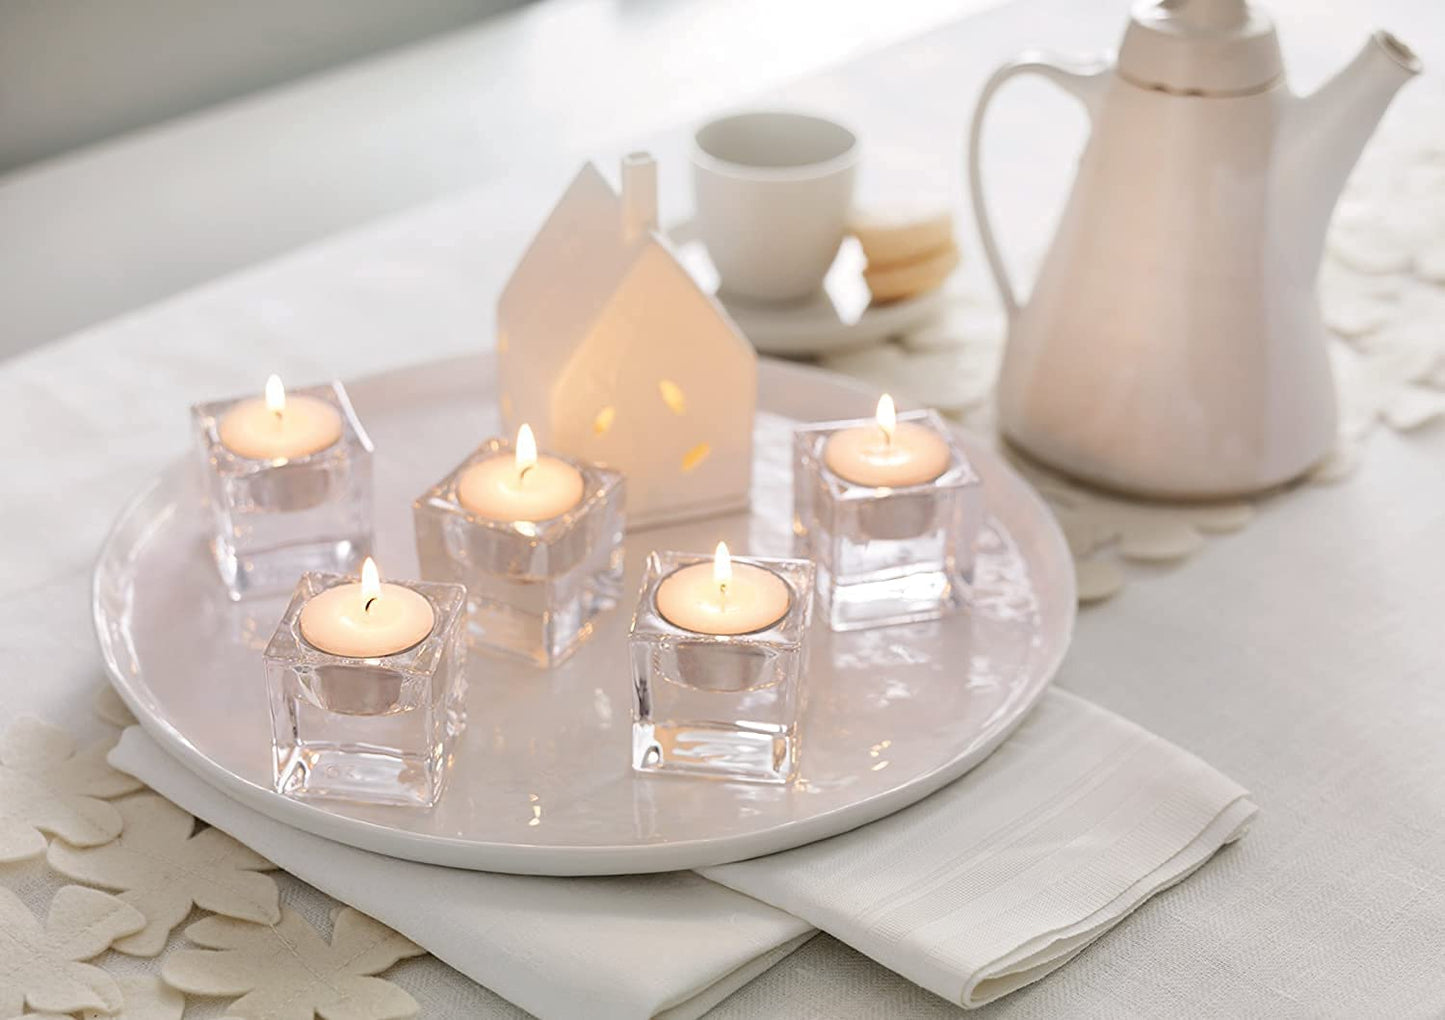 4 Hour Tealights (Pack of 100), 4 Hour Smokeless Burn Time, Unscented Wax Candles, 40 Mm Dia - Ideal for Decorative Purposes, Food Warmers - Weddings, Parties, Spa, Home Use, P950